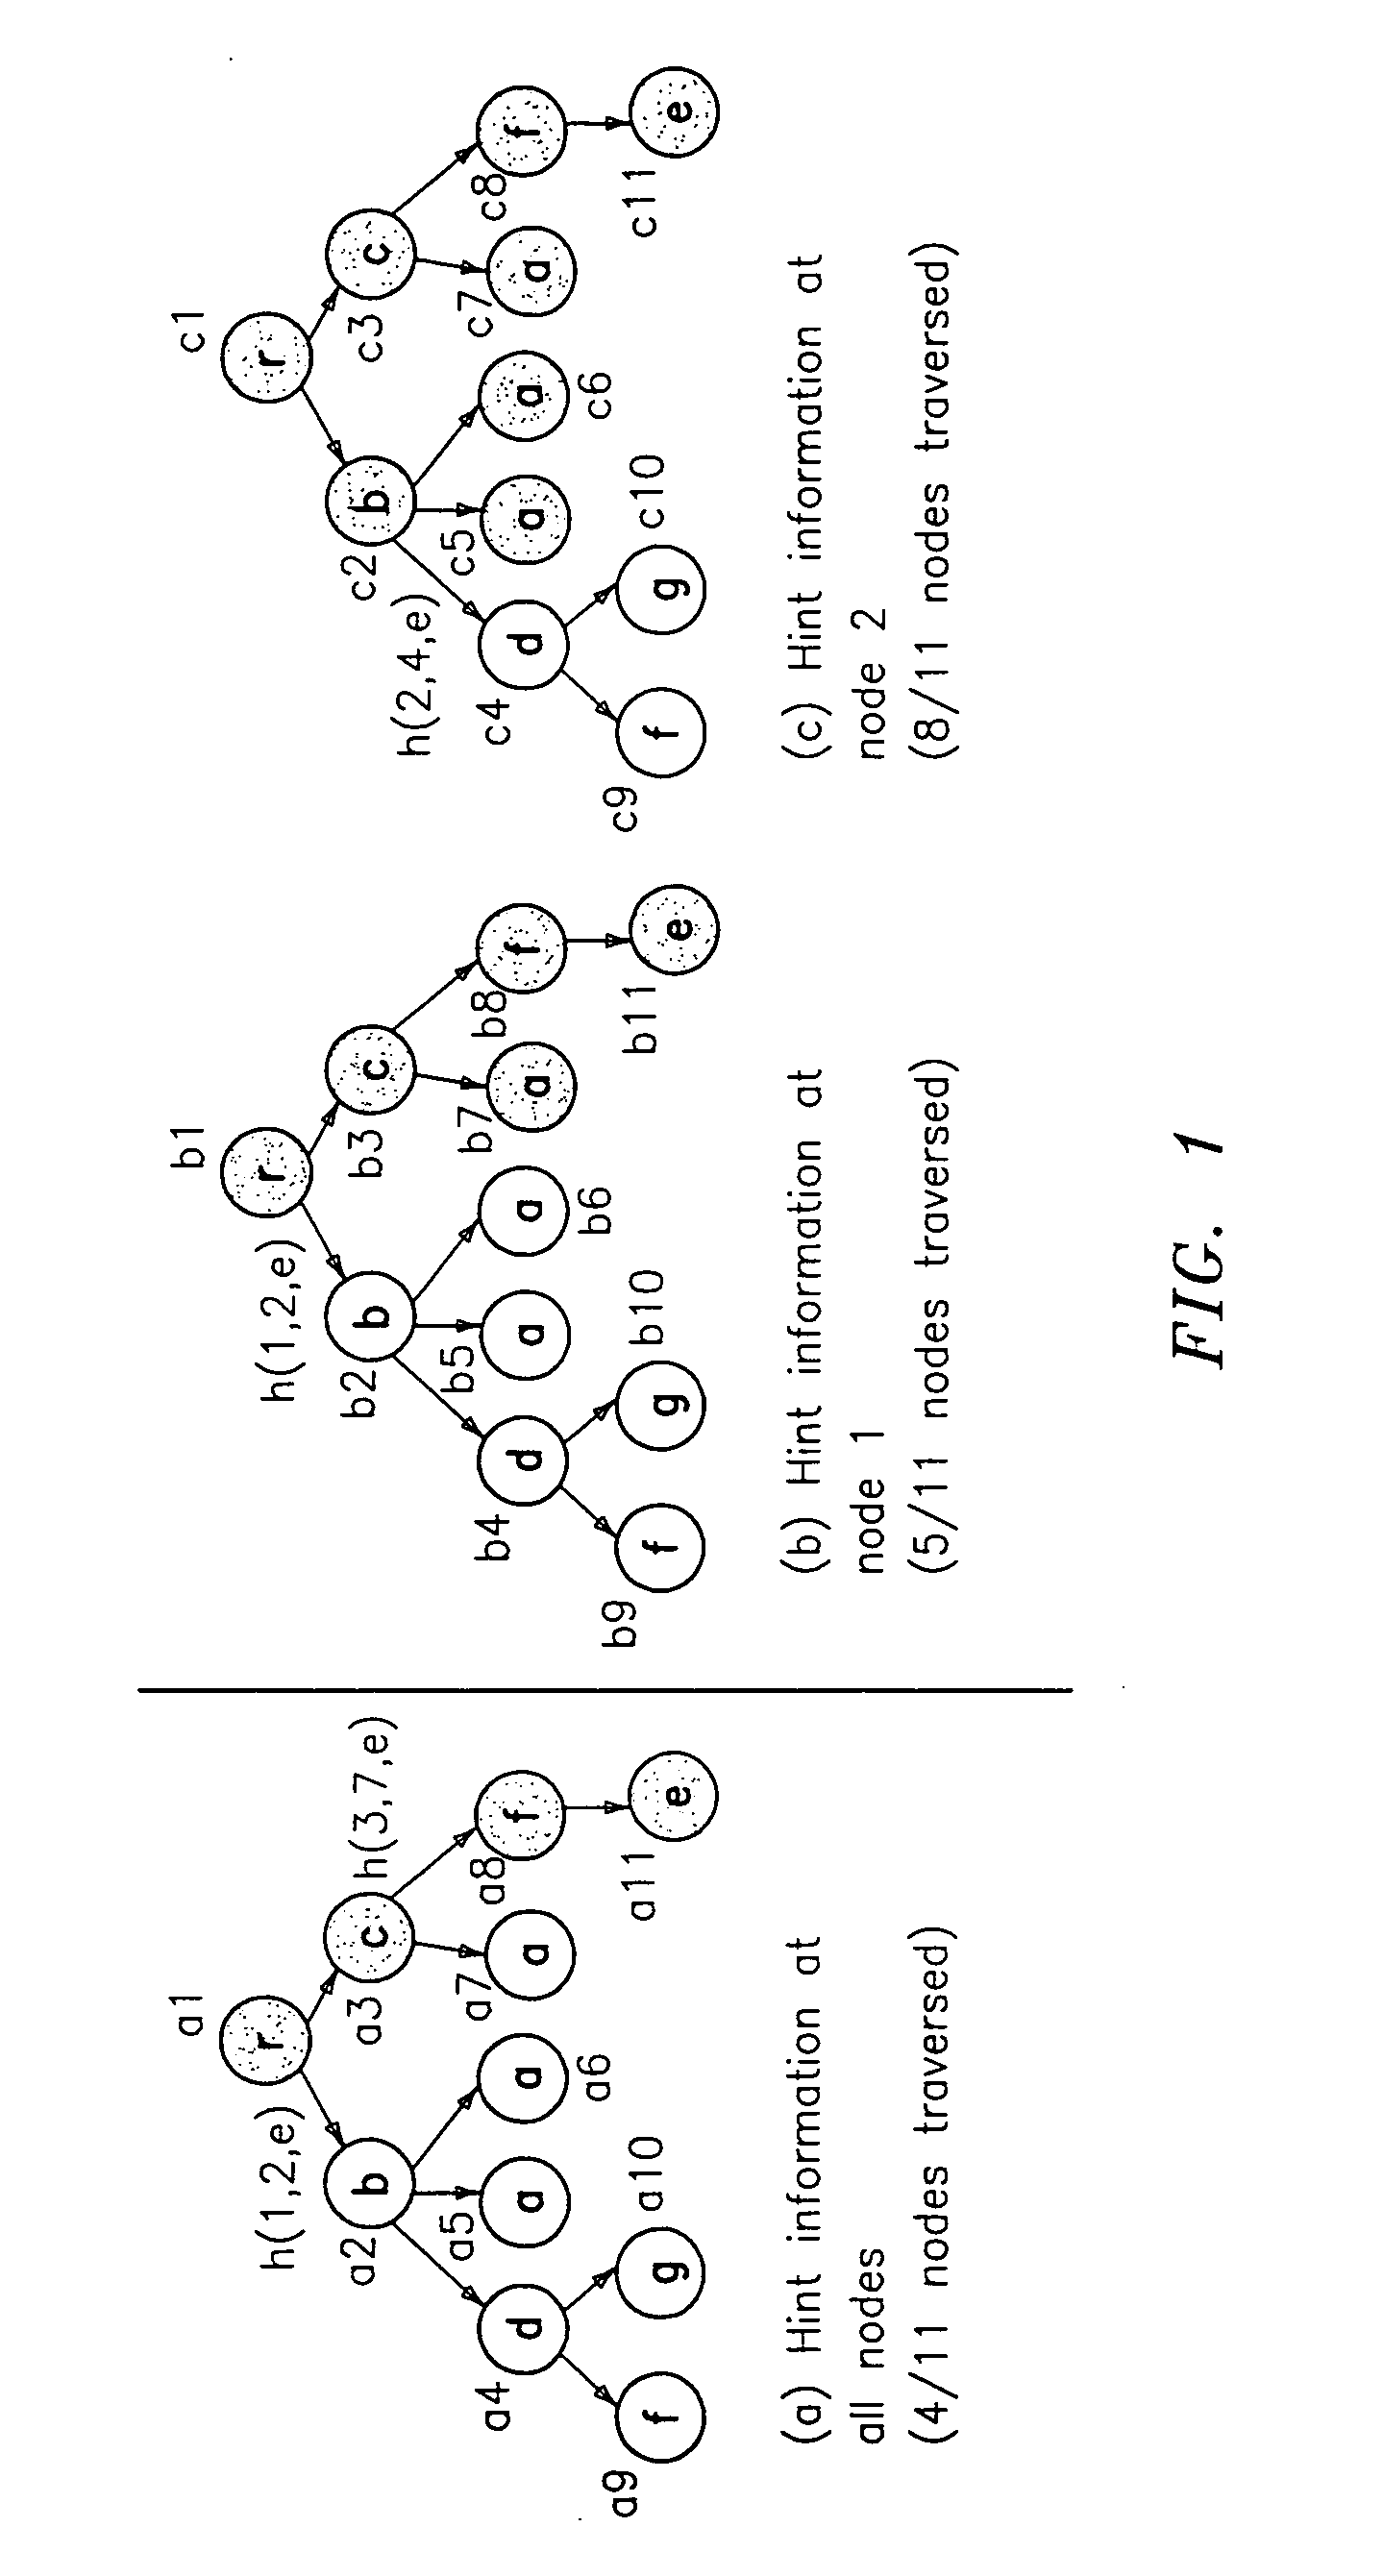 Selective path signatures for query processing over a hierarchical tagged data structure